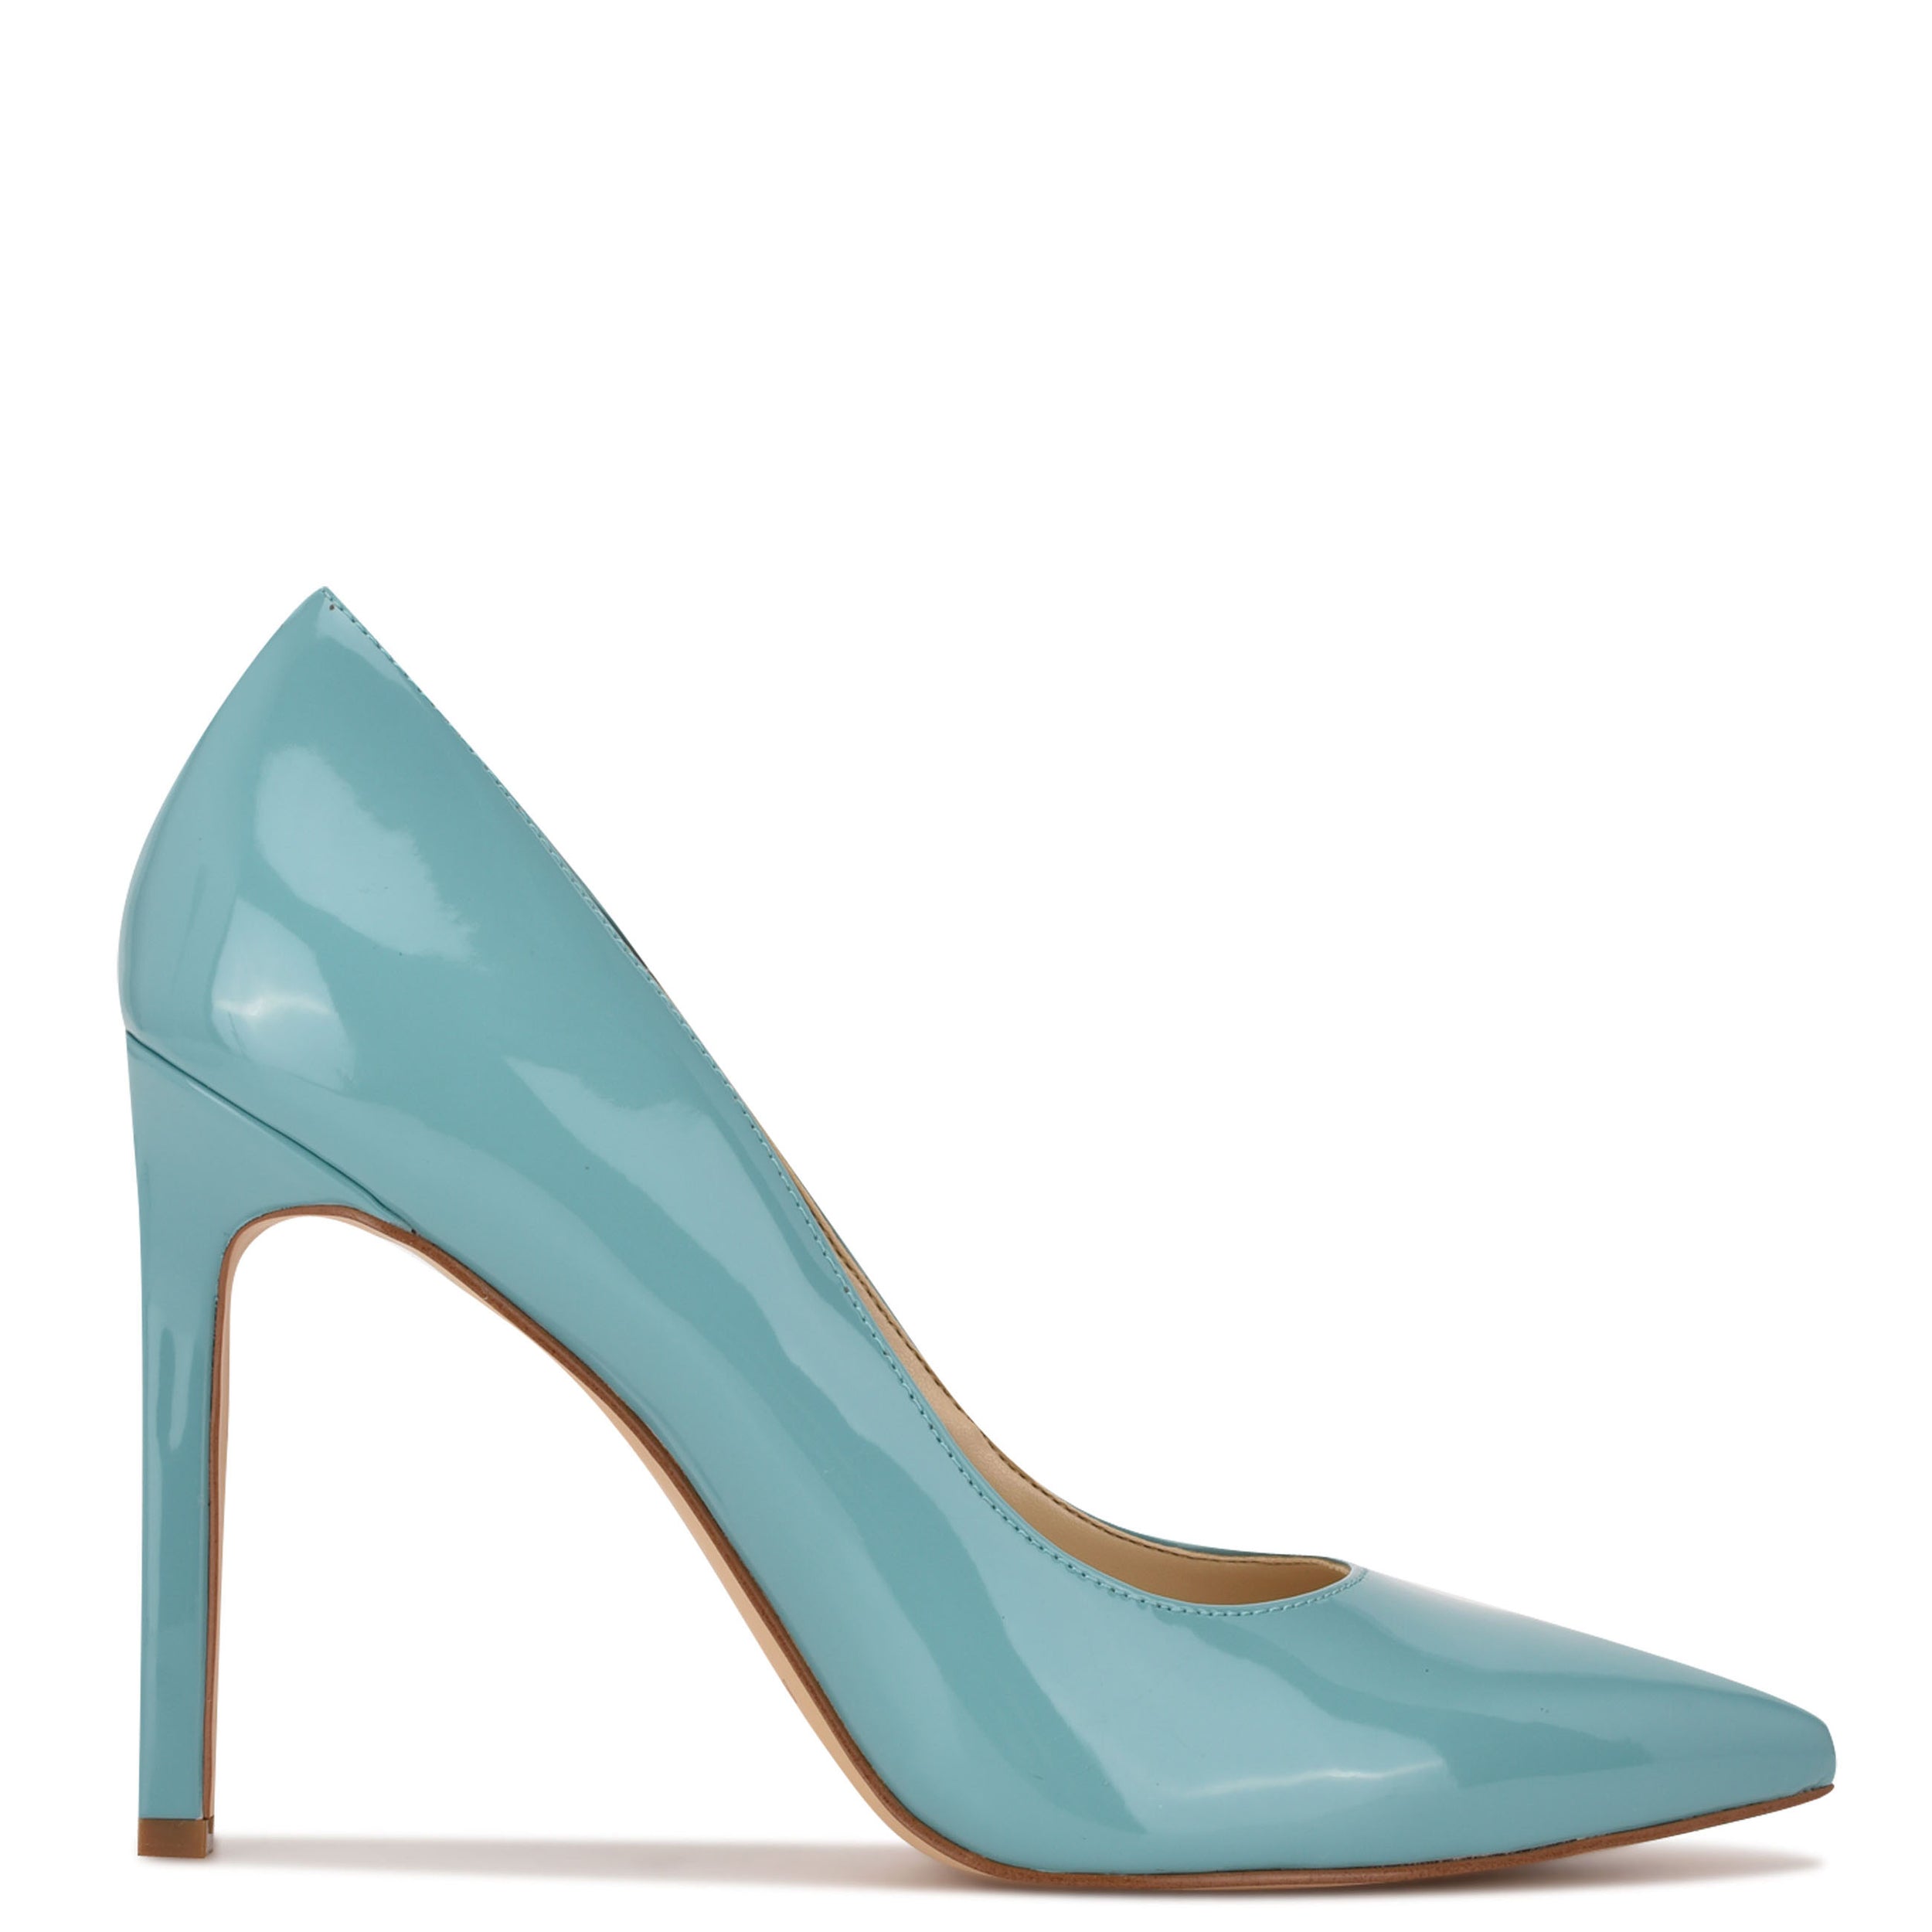 Heels | Nine West comfortable and fashionable shoes and handbags for ...